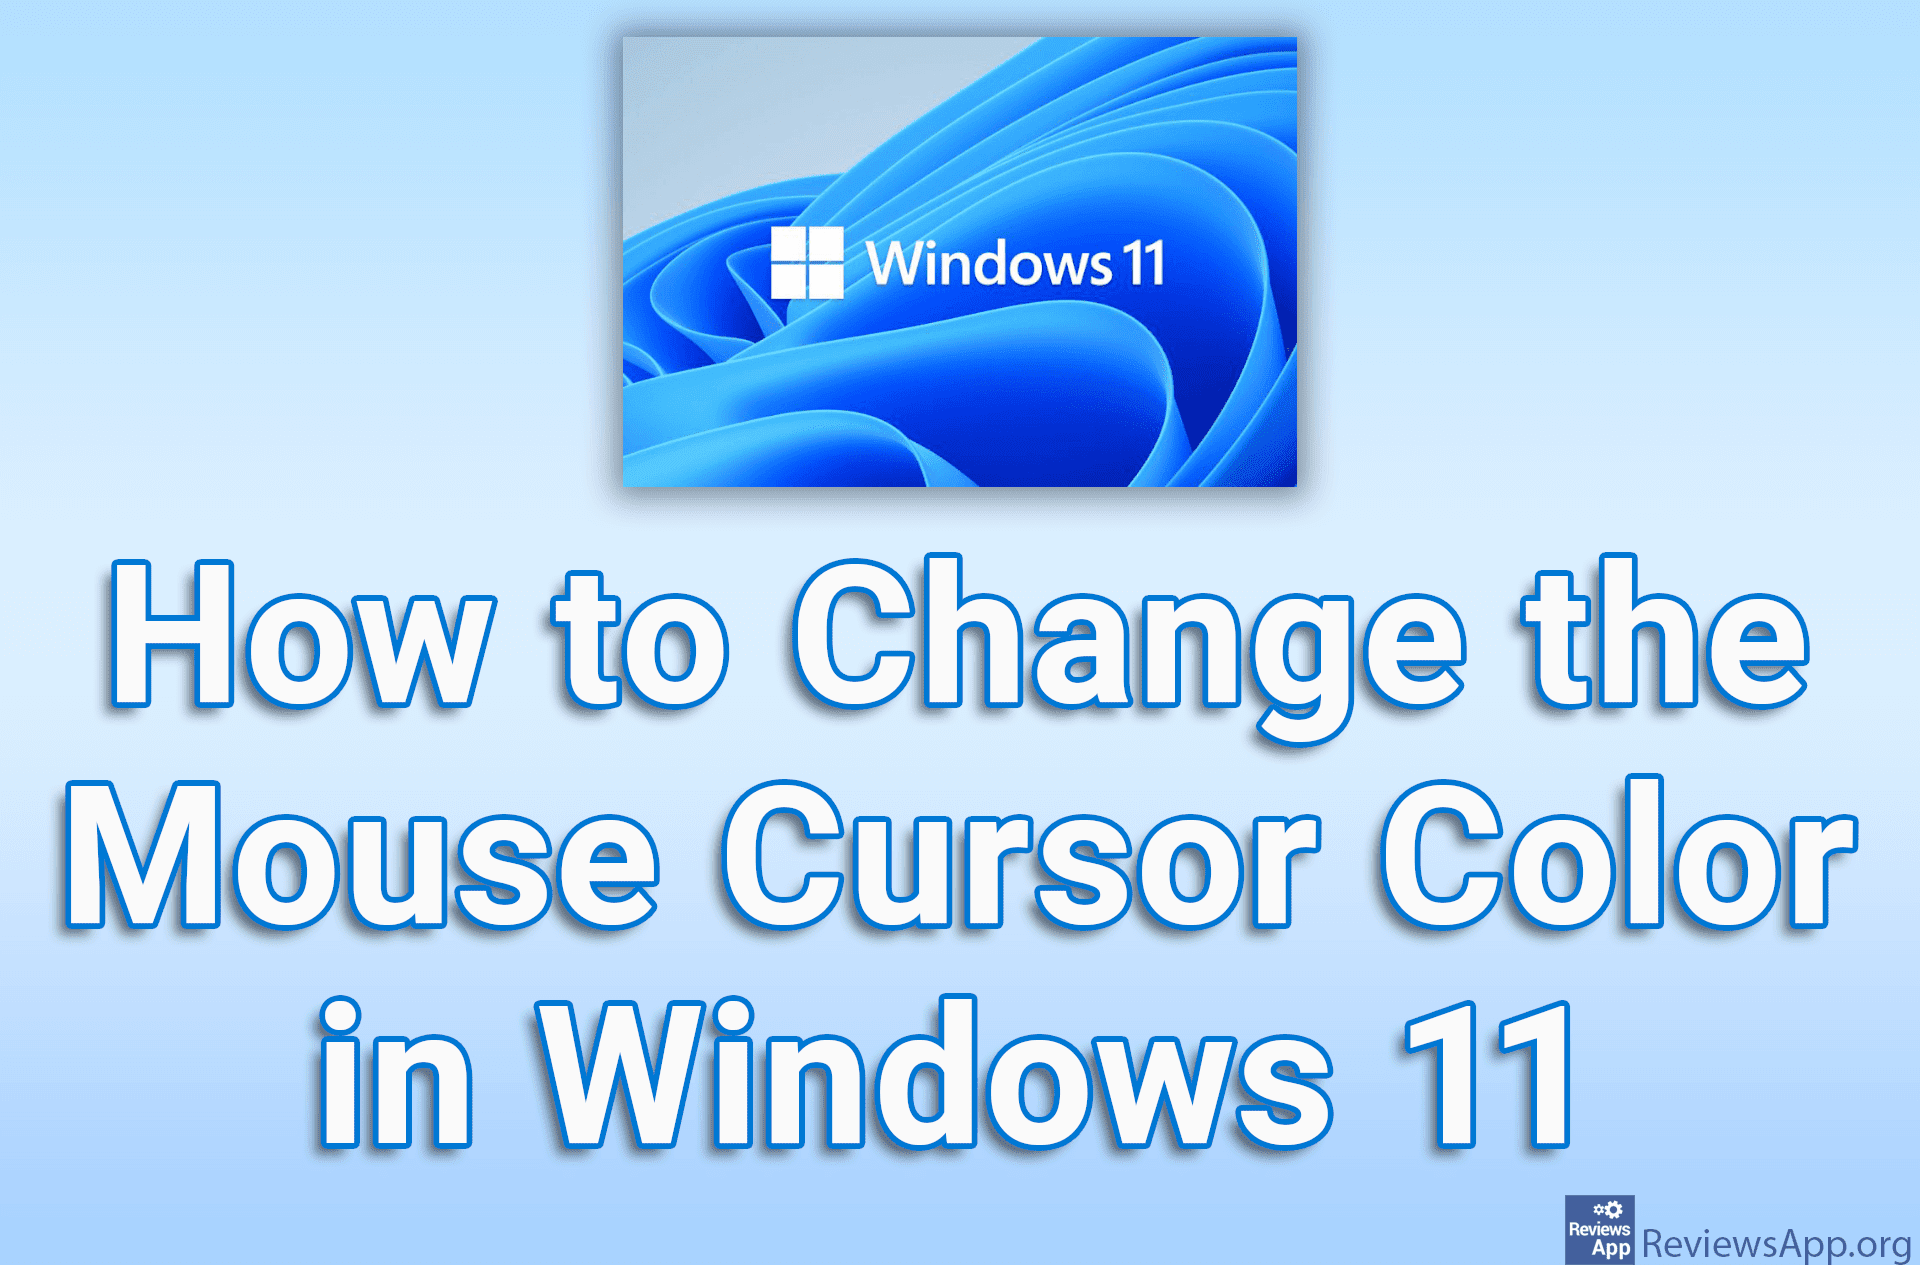 How to Change the Mouse Cursor Color in Windows 11